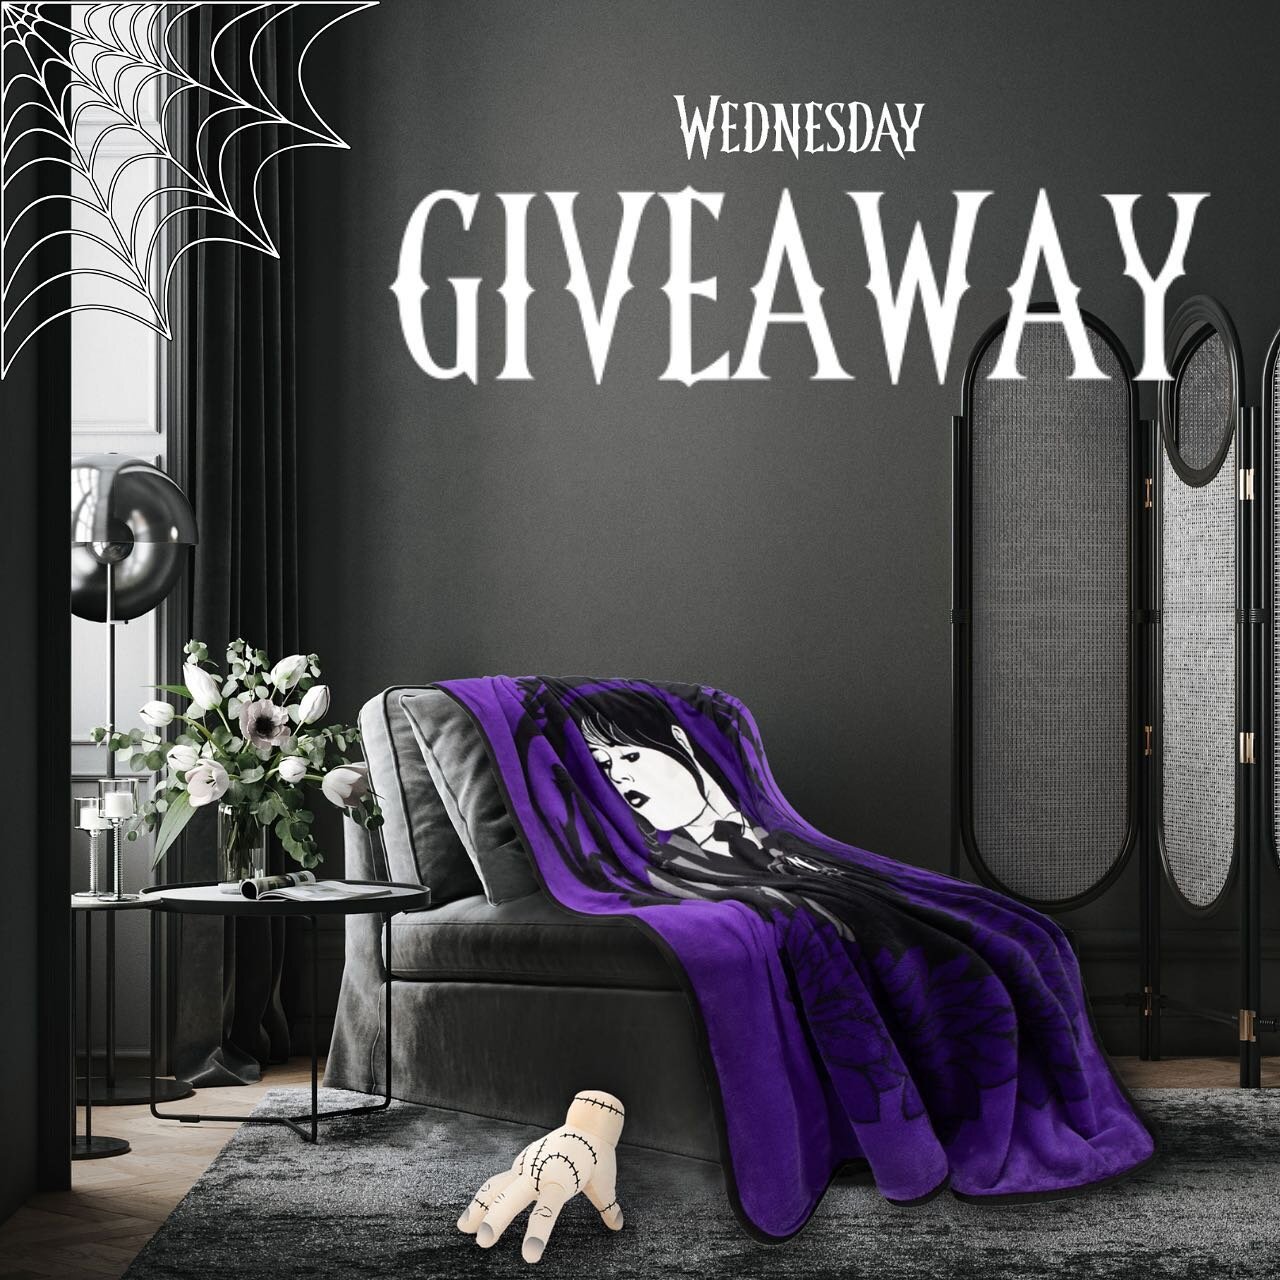 💀🖤 GIVEAWAY ALERT!&nbsp;🖤💀

Use those hands hands hands to enter to win one of our Wednesday Addams Throws and a Thing Pillow Buddy! 👏🏼👏🏼

How to Enter: 

💀Follow @jayfranco.home 
💀Like this post and tag three fellow spooky souls who love W